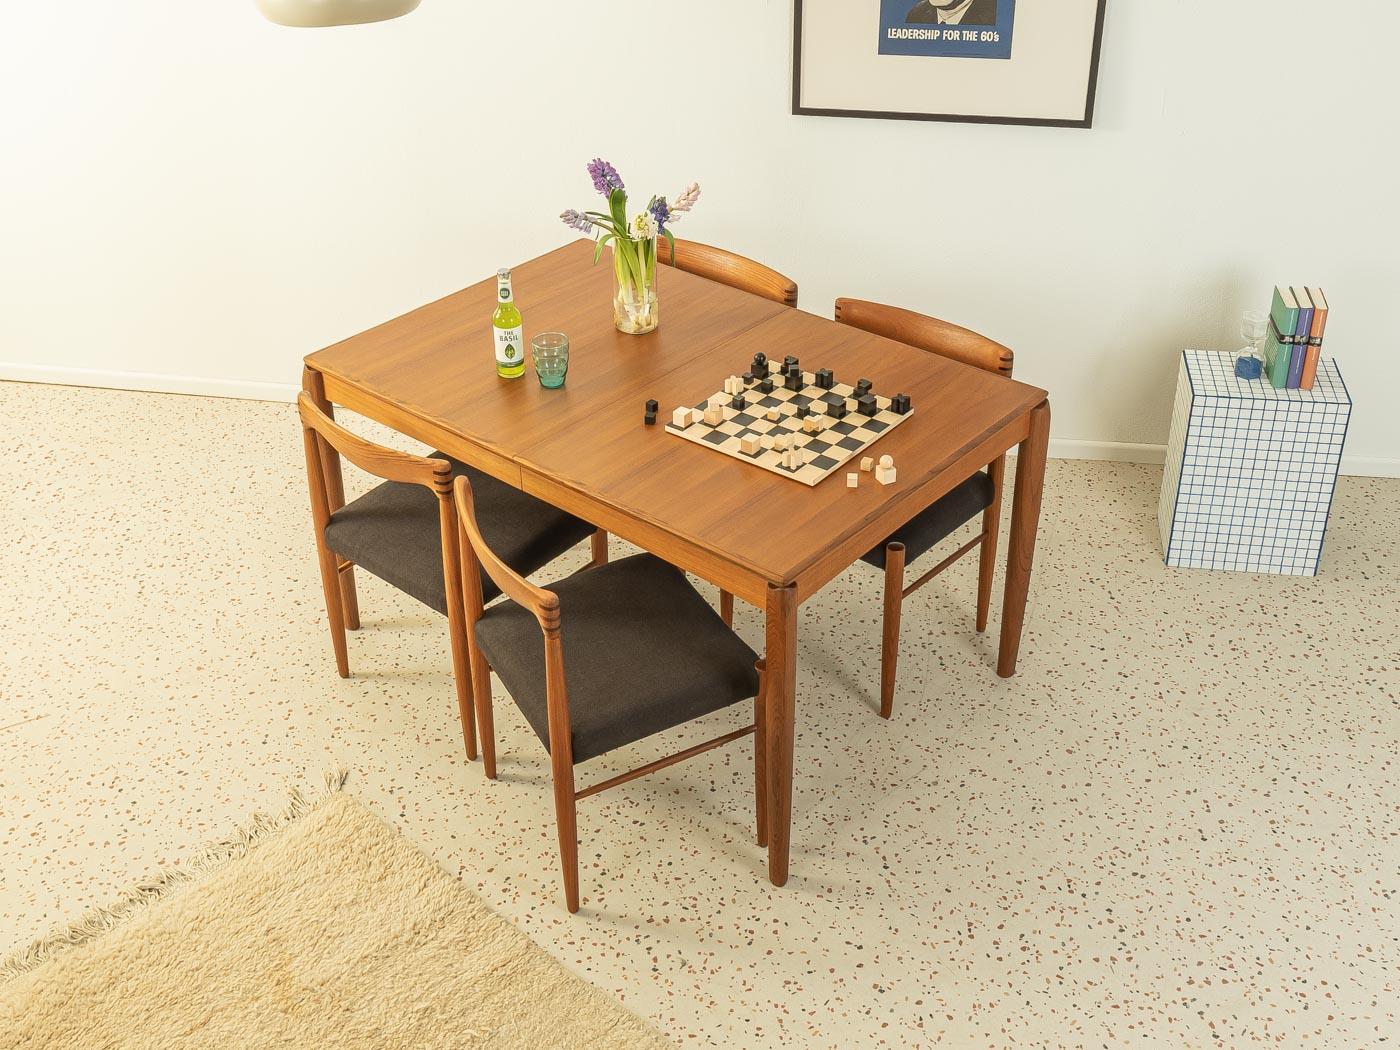 Mid-Century Modern Extendable Teak Dining Table from the 1960s by H.W. Klein for Bramin, Denmark